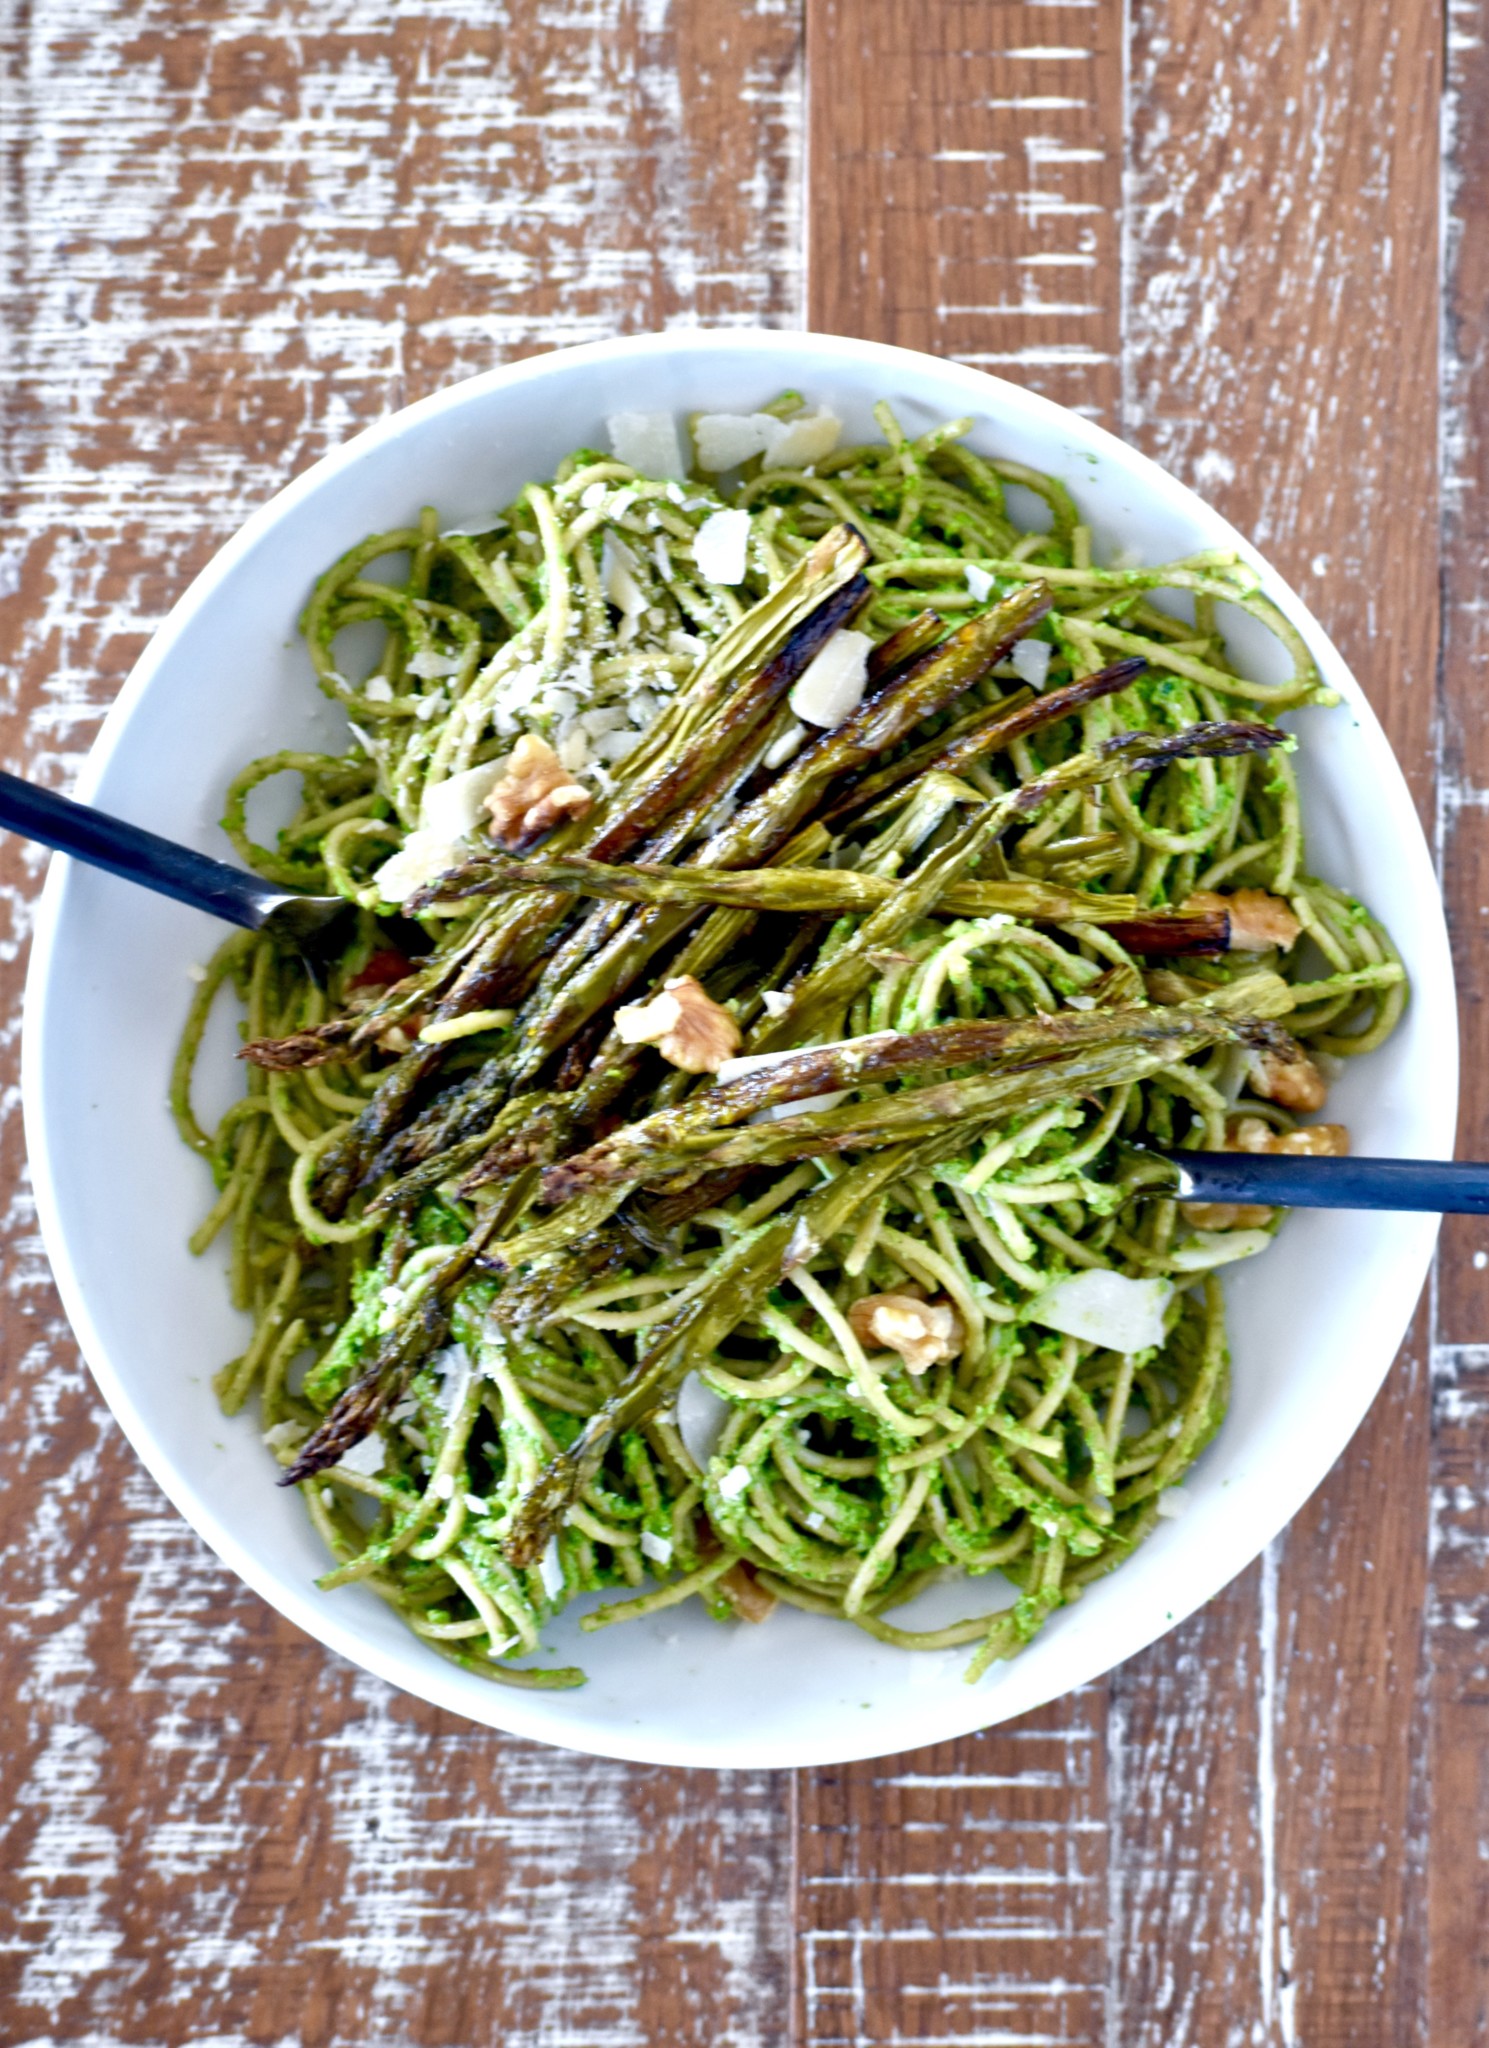 whole wheat pasta with 5-ingredient spinach walnut pesto, roasted asparagus and walnuts // cait's plate